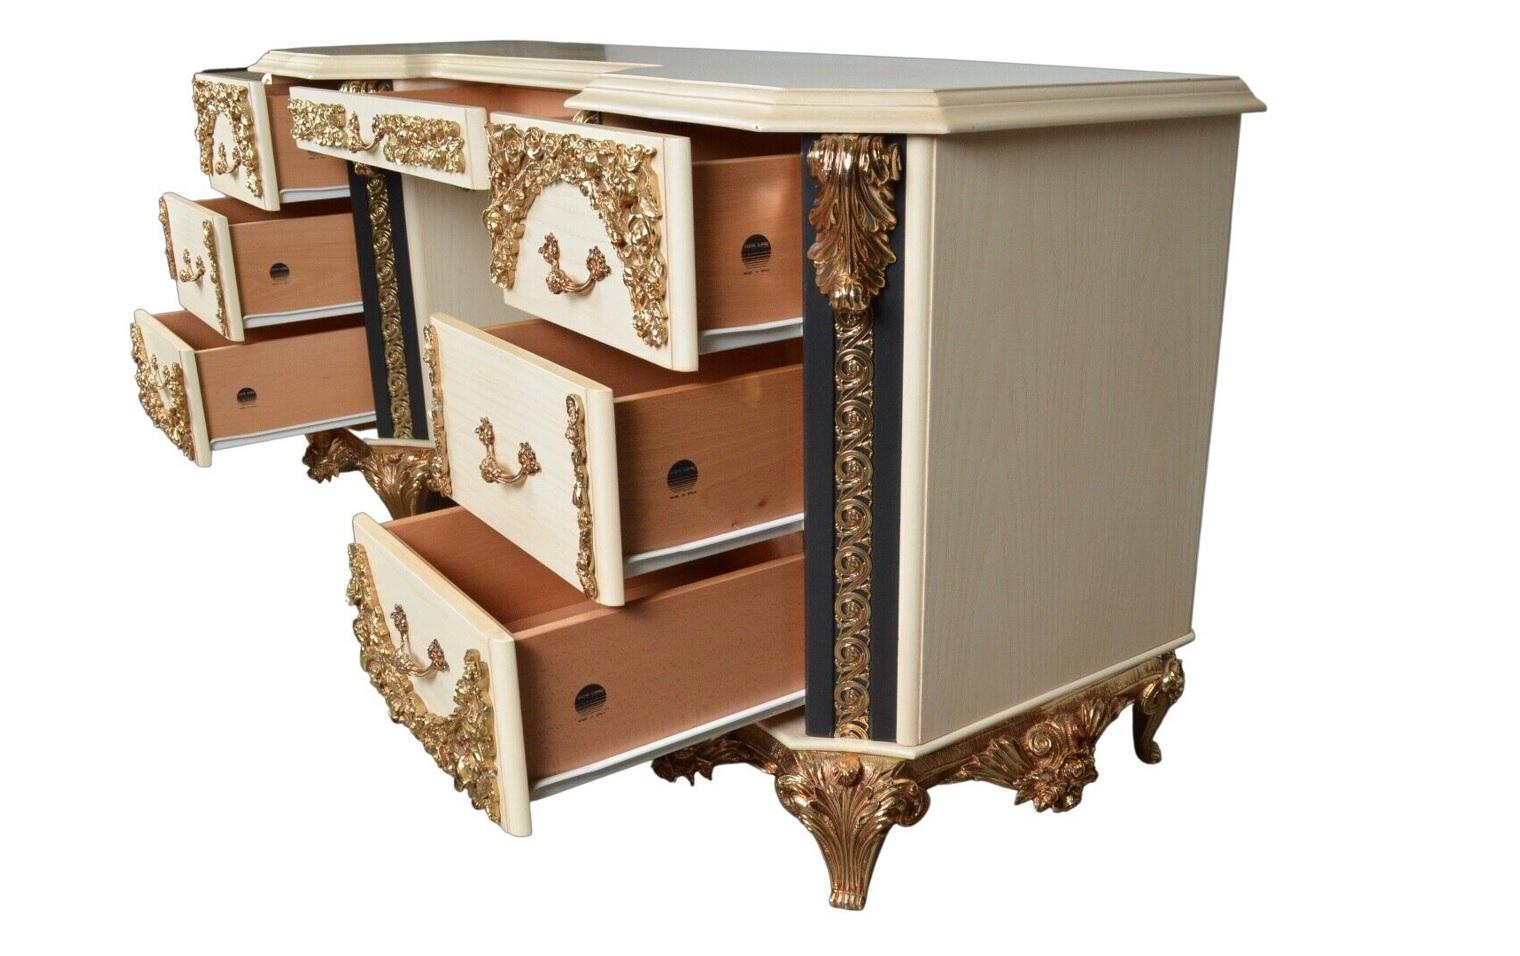 Spanish Exclusive Rococo Vidal Grau Dressing Table, C 1970 / Matching Furniture Avail For Sale